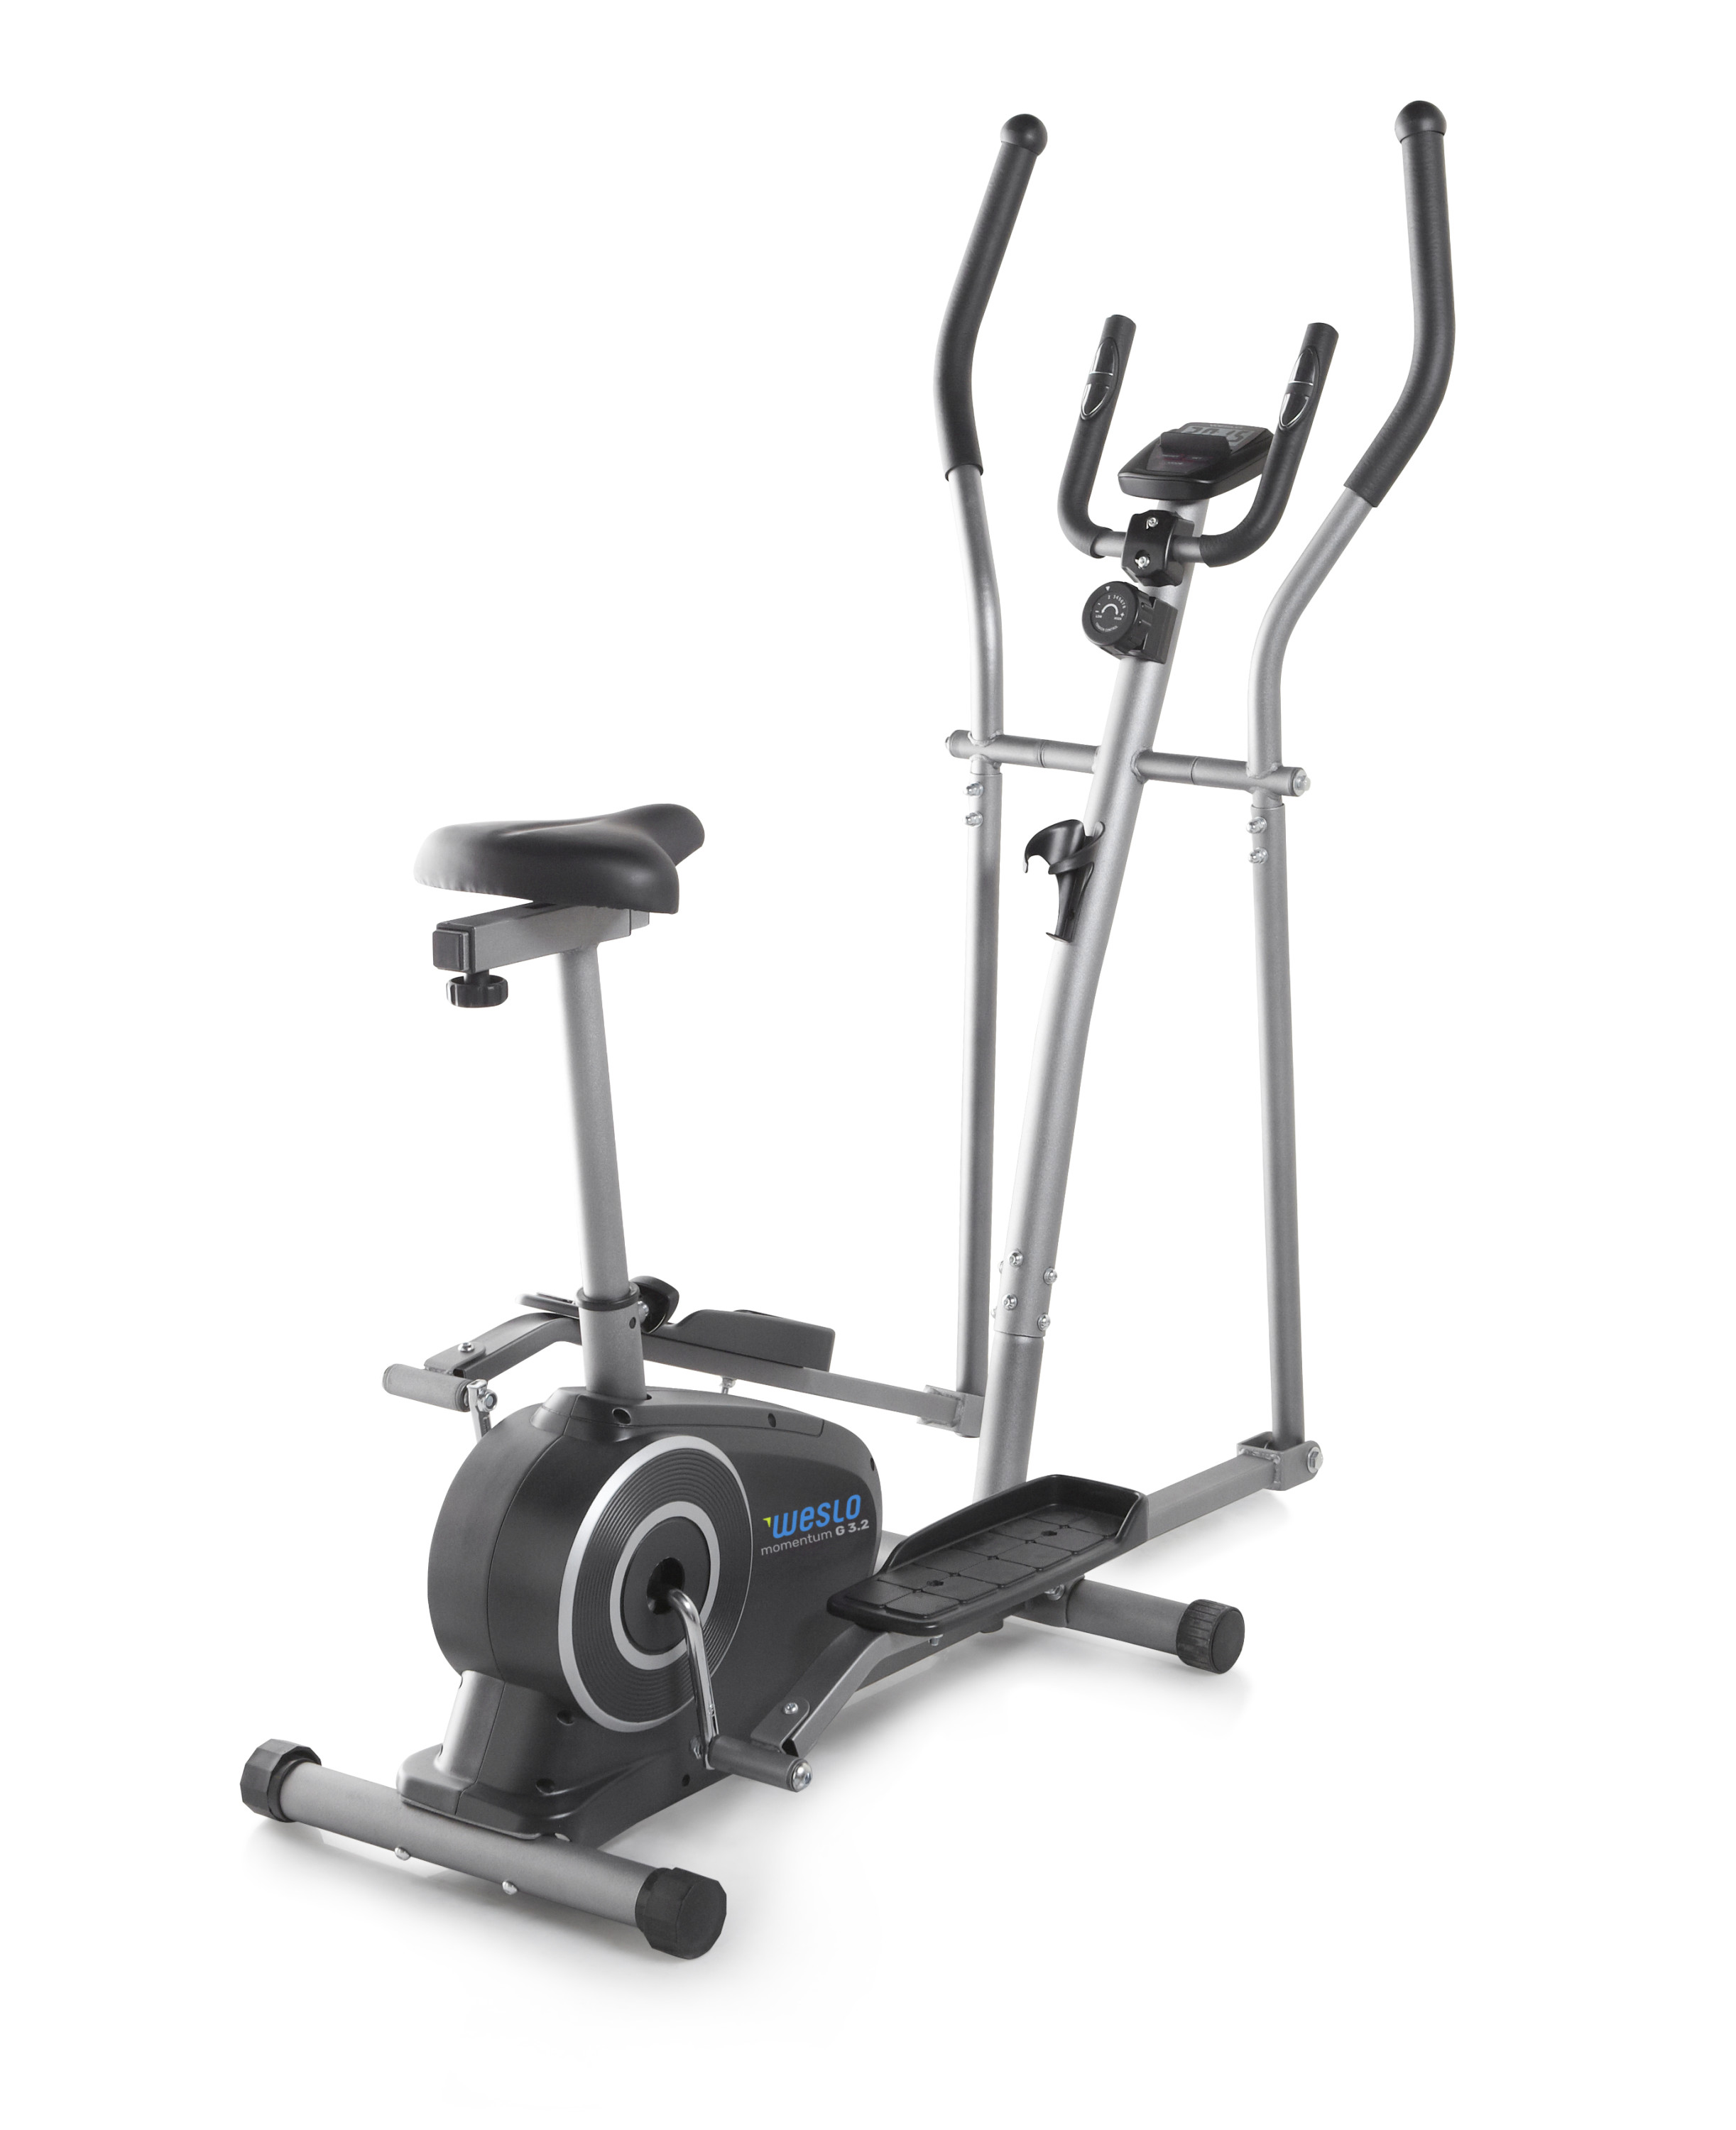 Weslo Momentum G 3.2 Bike and Elliptical Hybrid Trainer with LCD Window Display and 250 lb. Weight Capacity - image 1 of 14